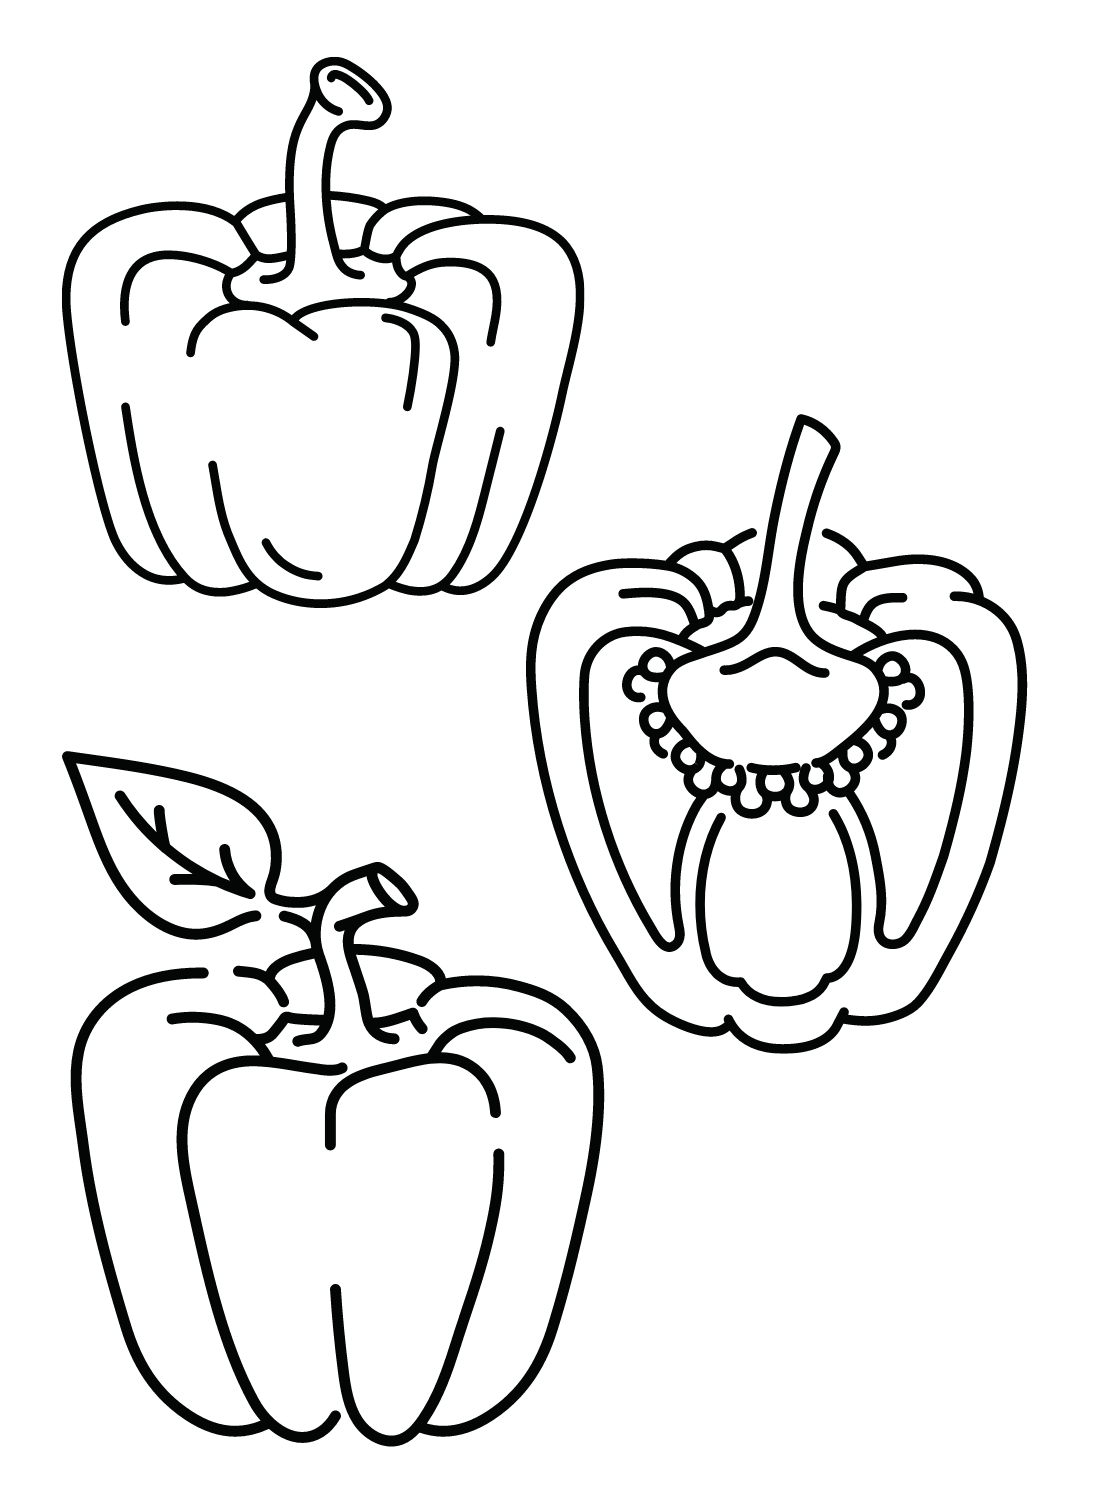 Bell Pepper to Print Coloring Page